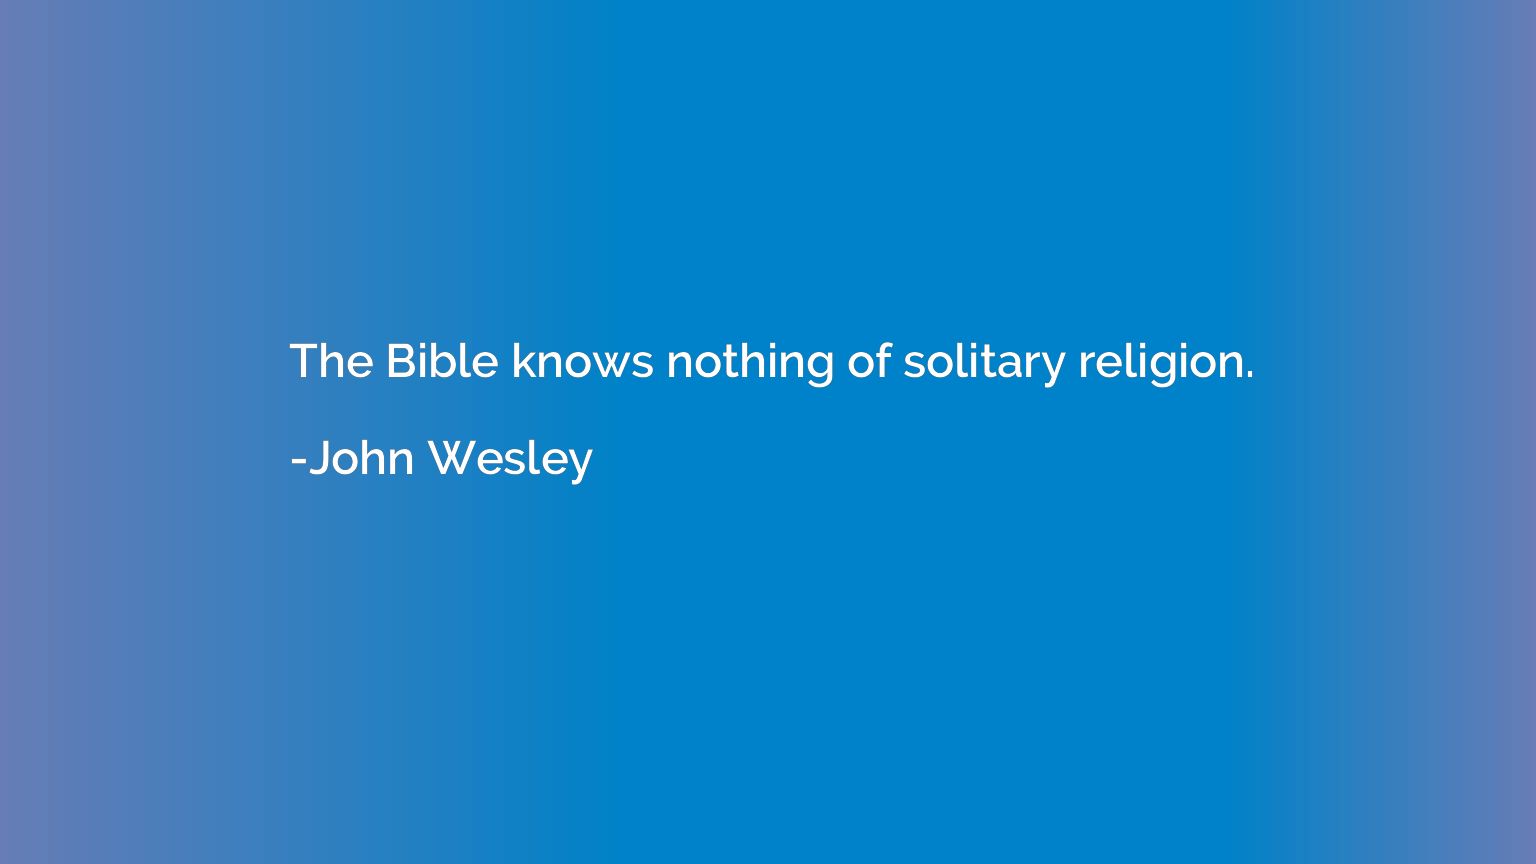 The Bible knows nothing of solitary religion.